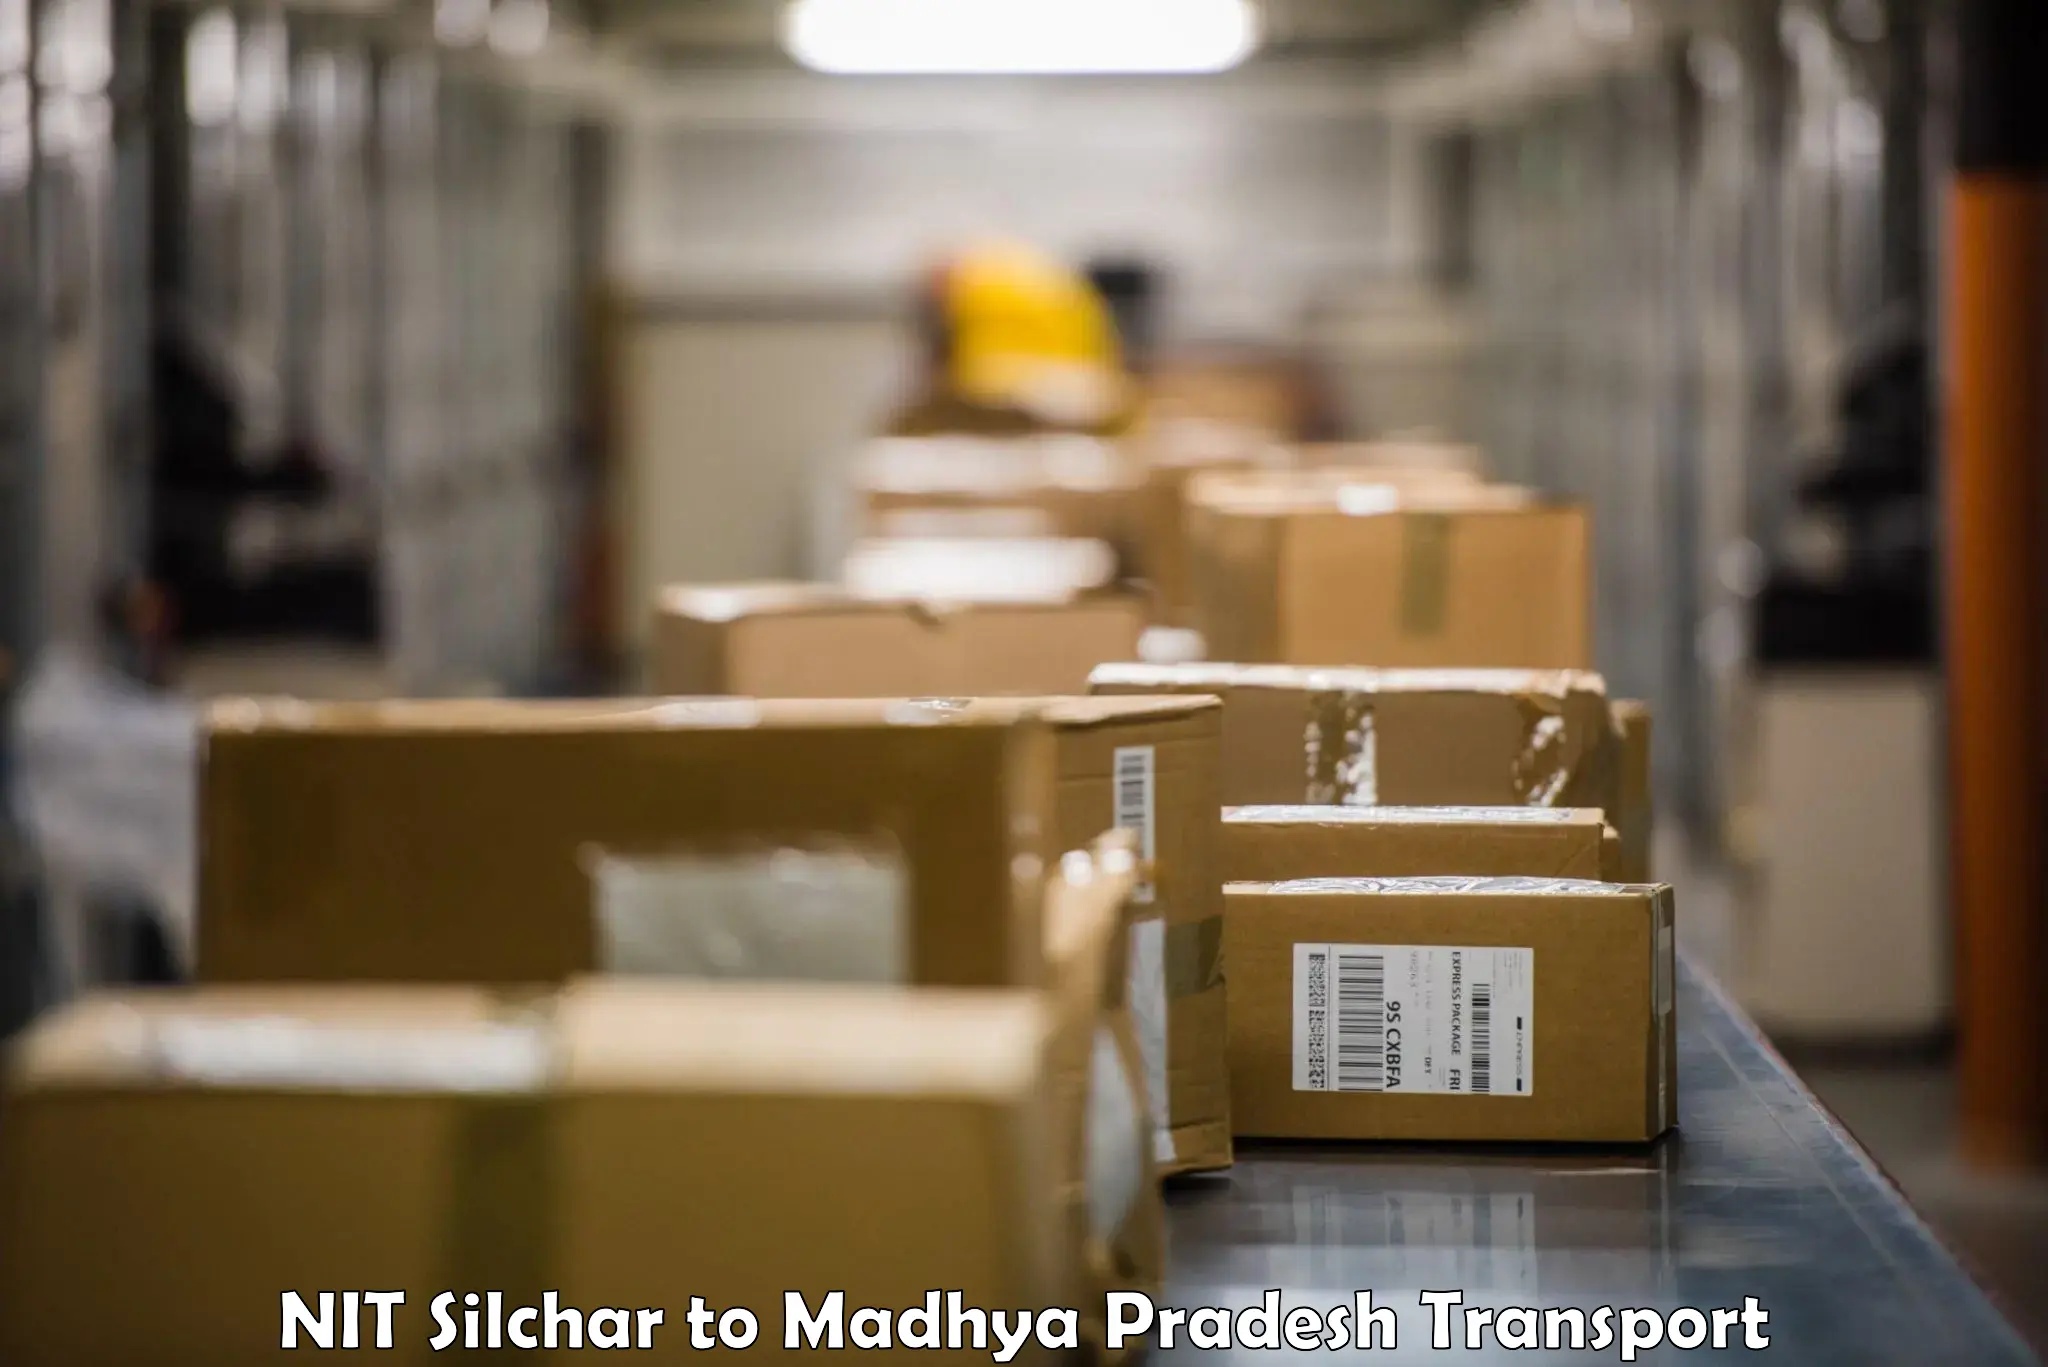 Parcel transport services NIT Silchar to Gwalior